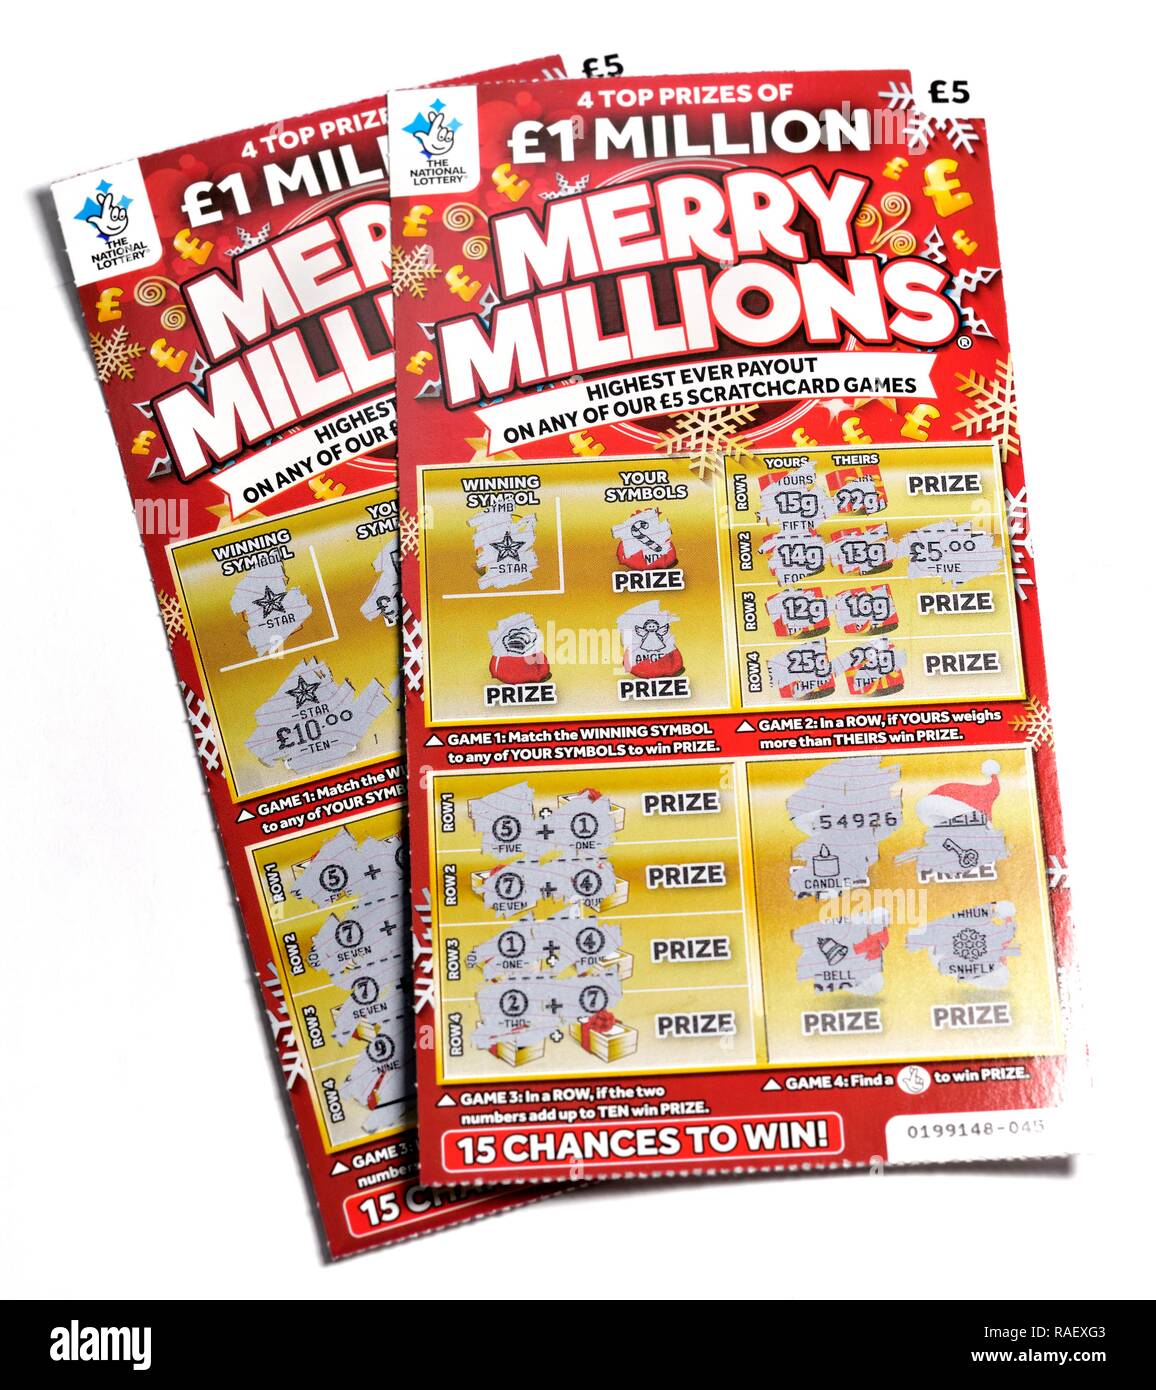 National Lottery Scratch Cards 1 million Merry Millions Stock Photo